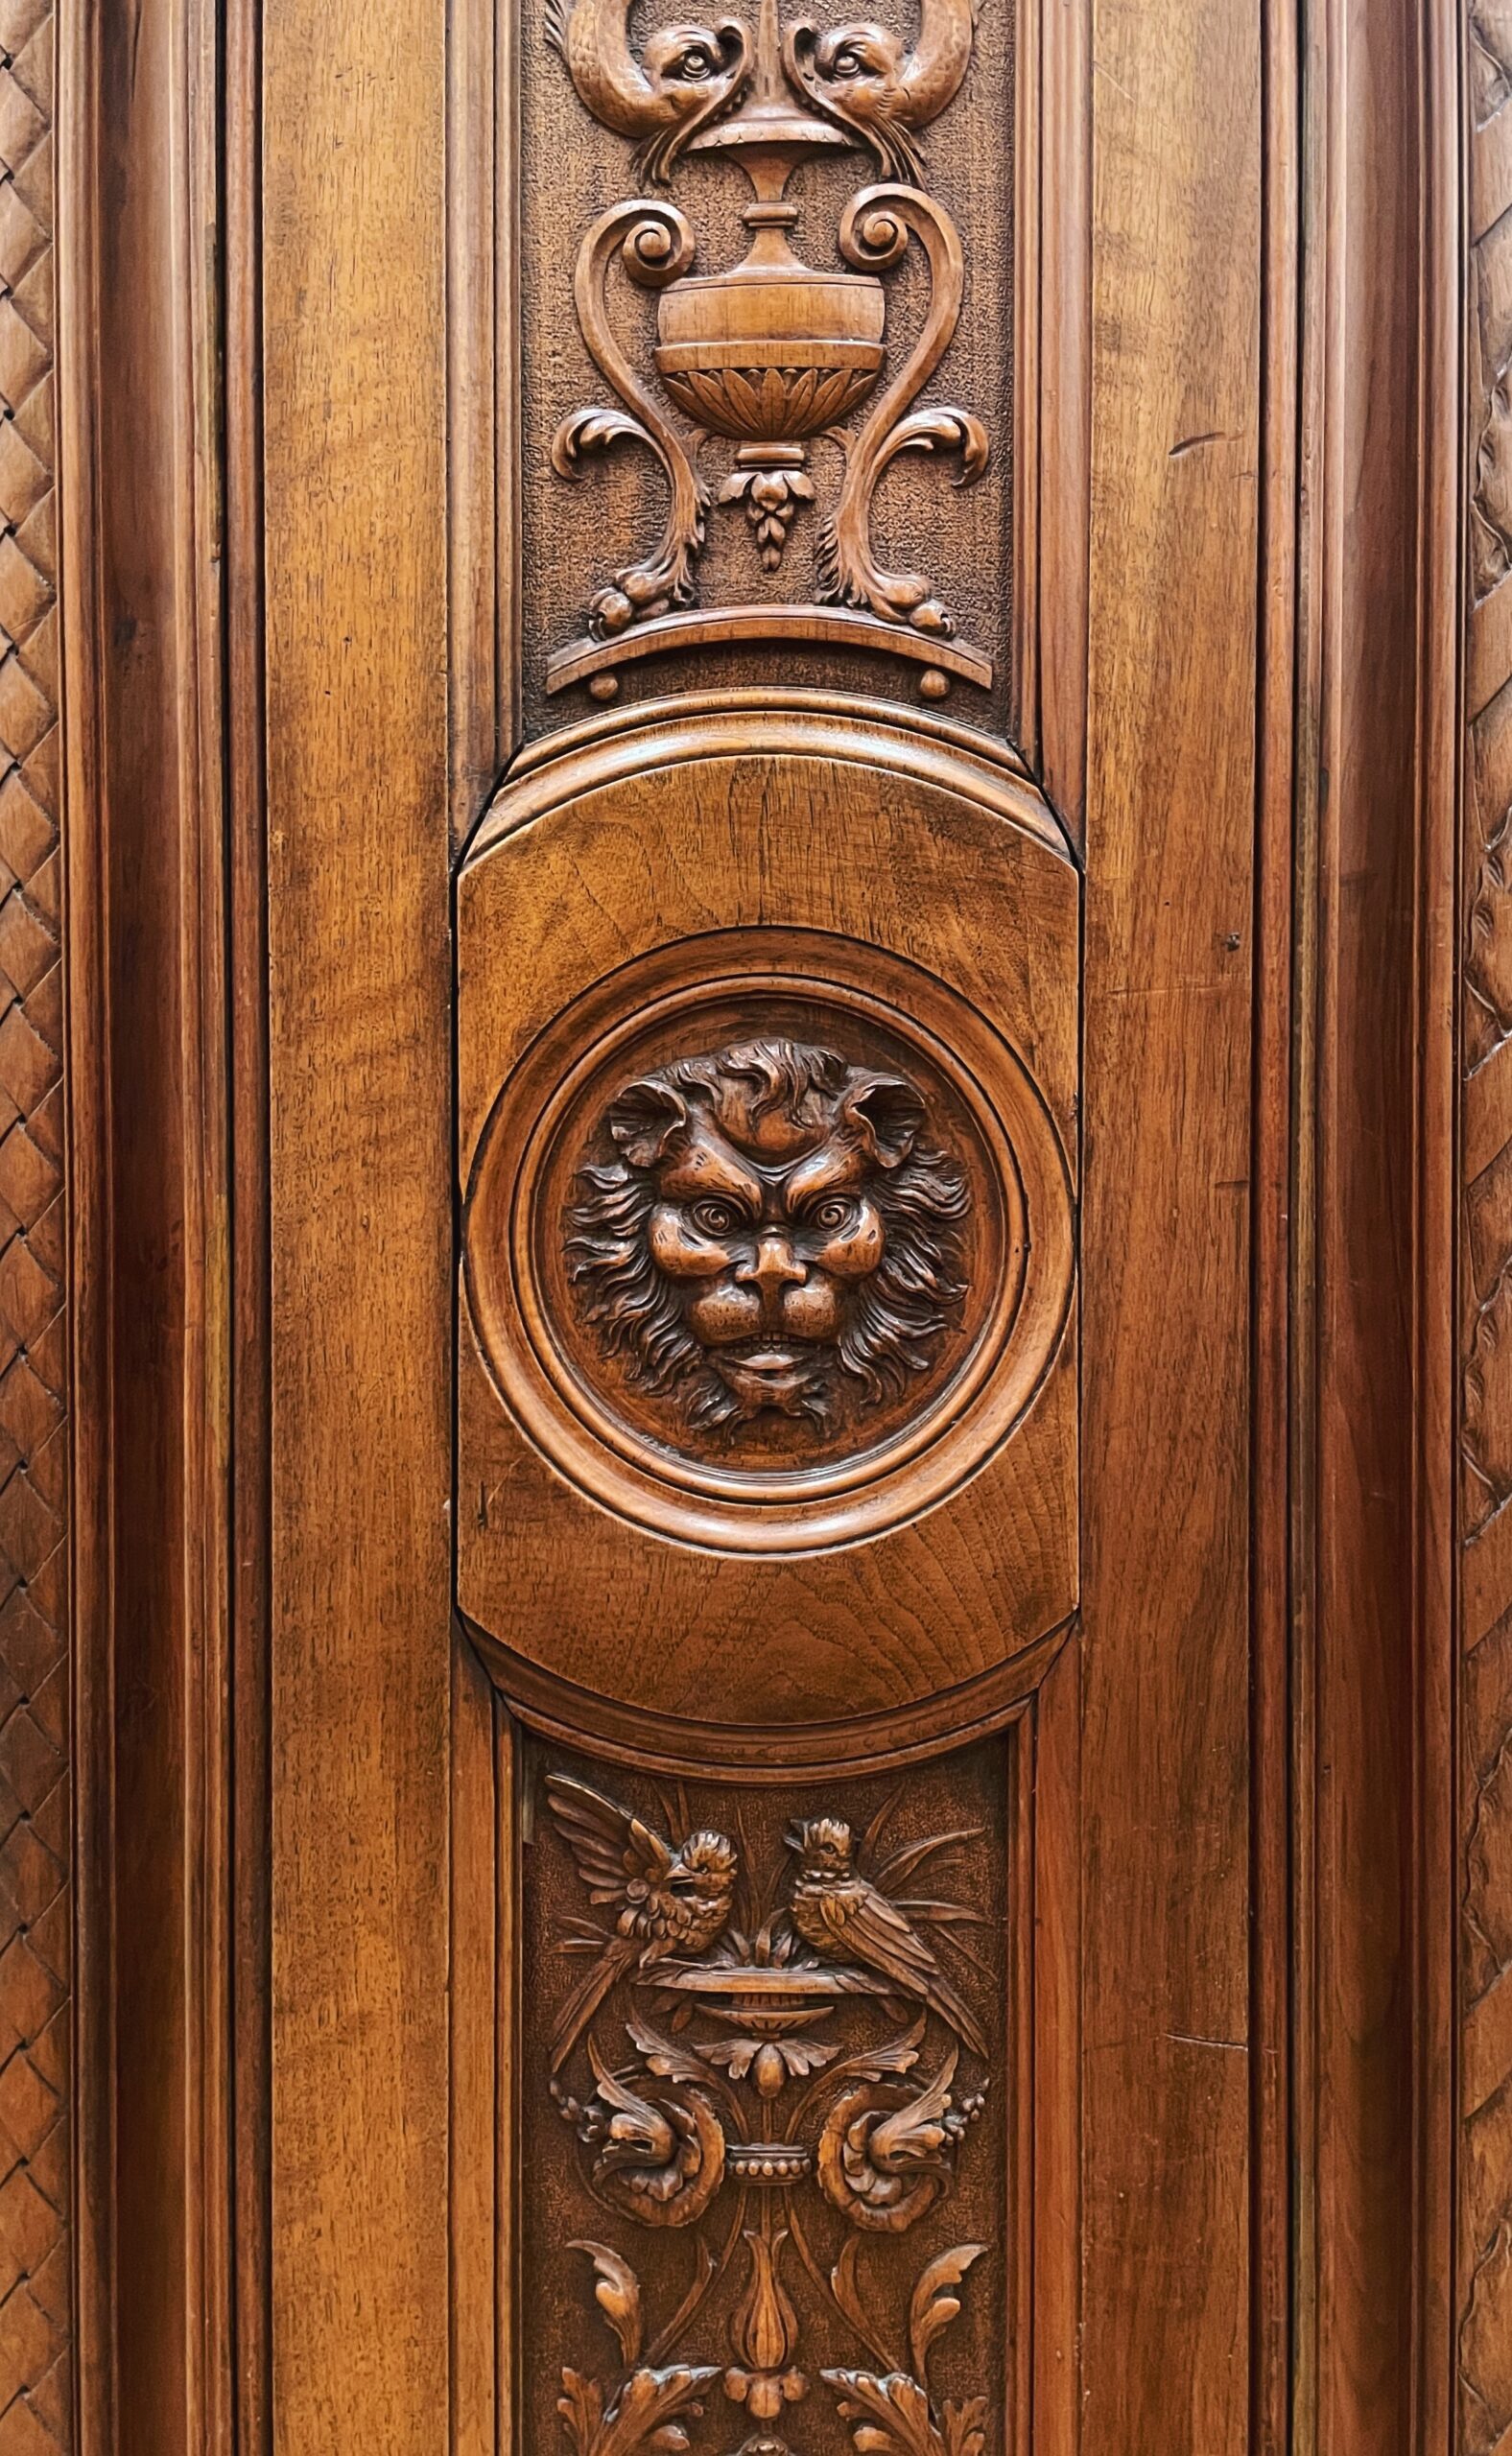 Carved doorway with a lion in the center surrounded by decorative detail